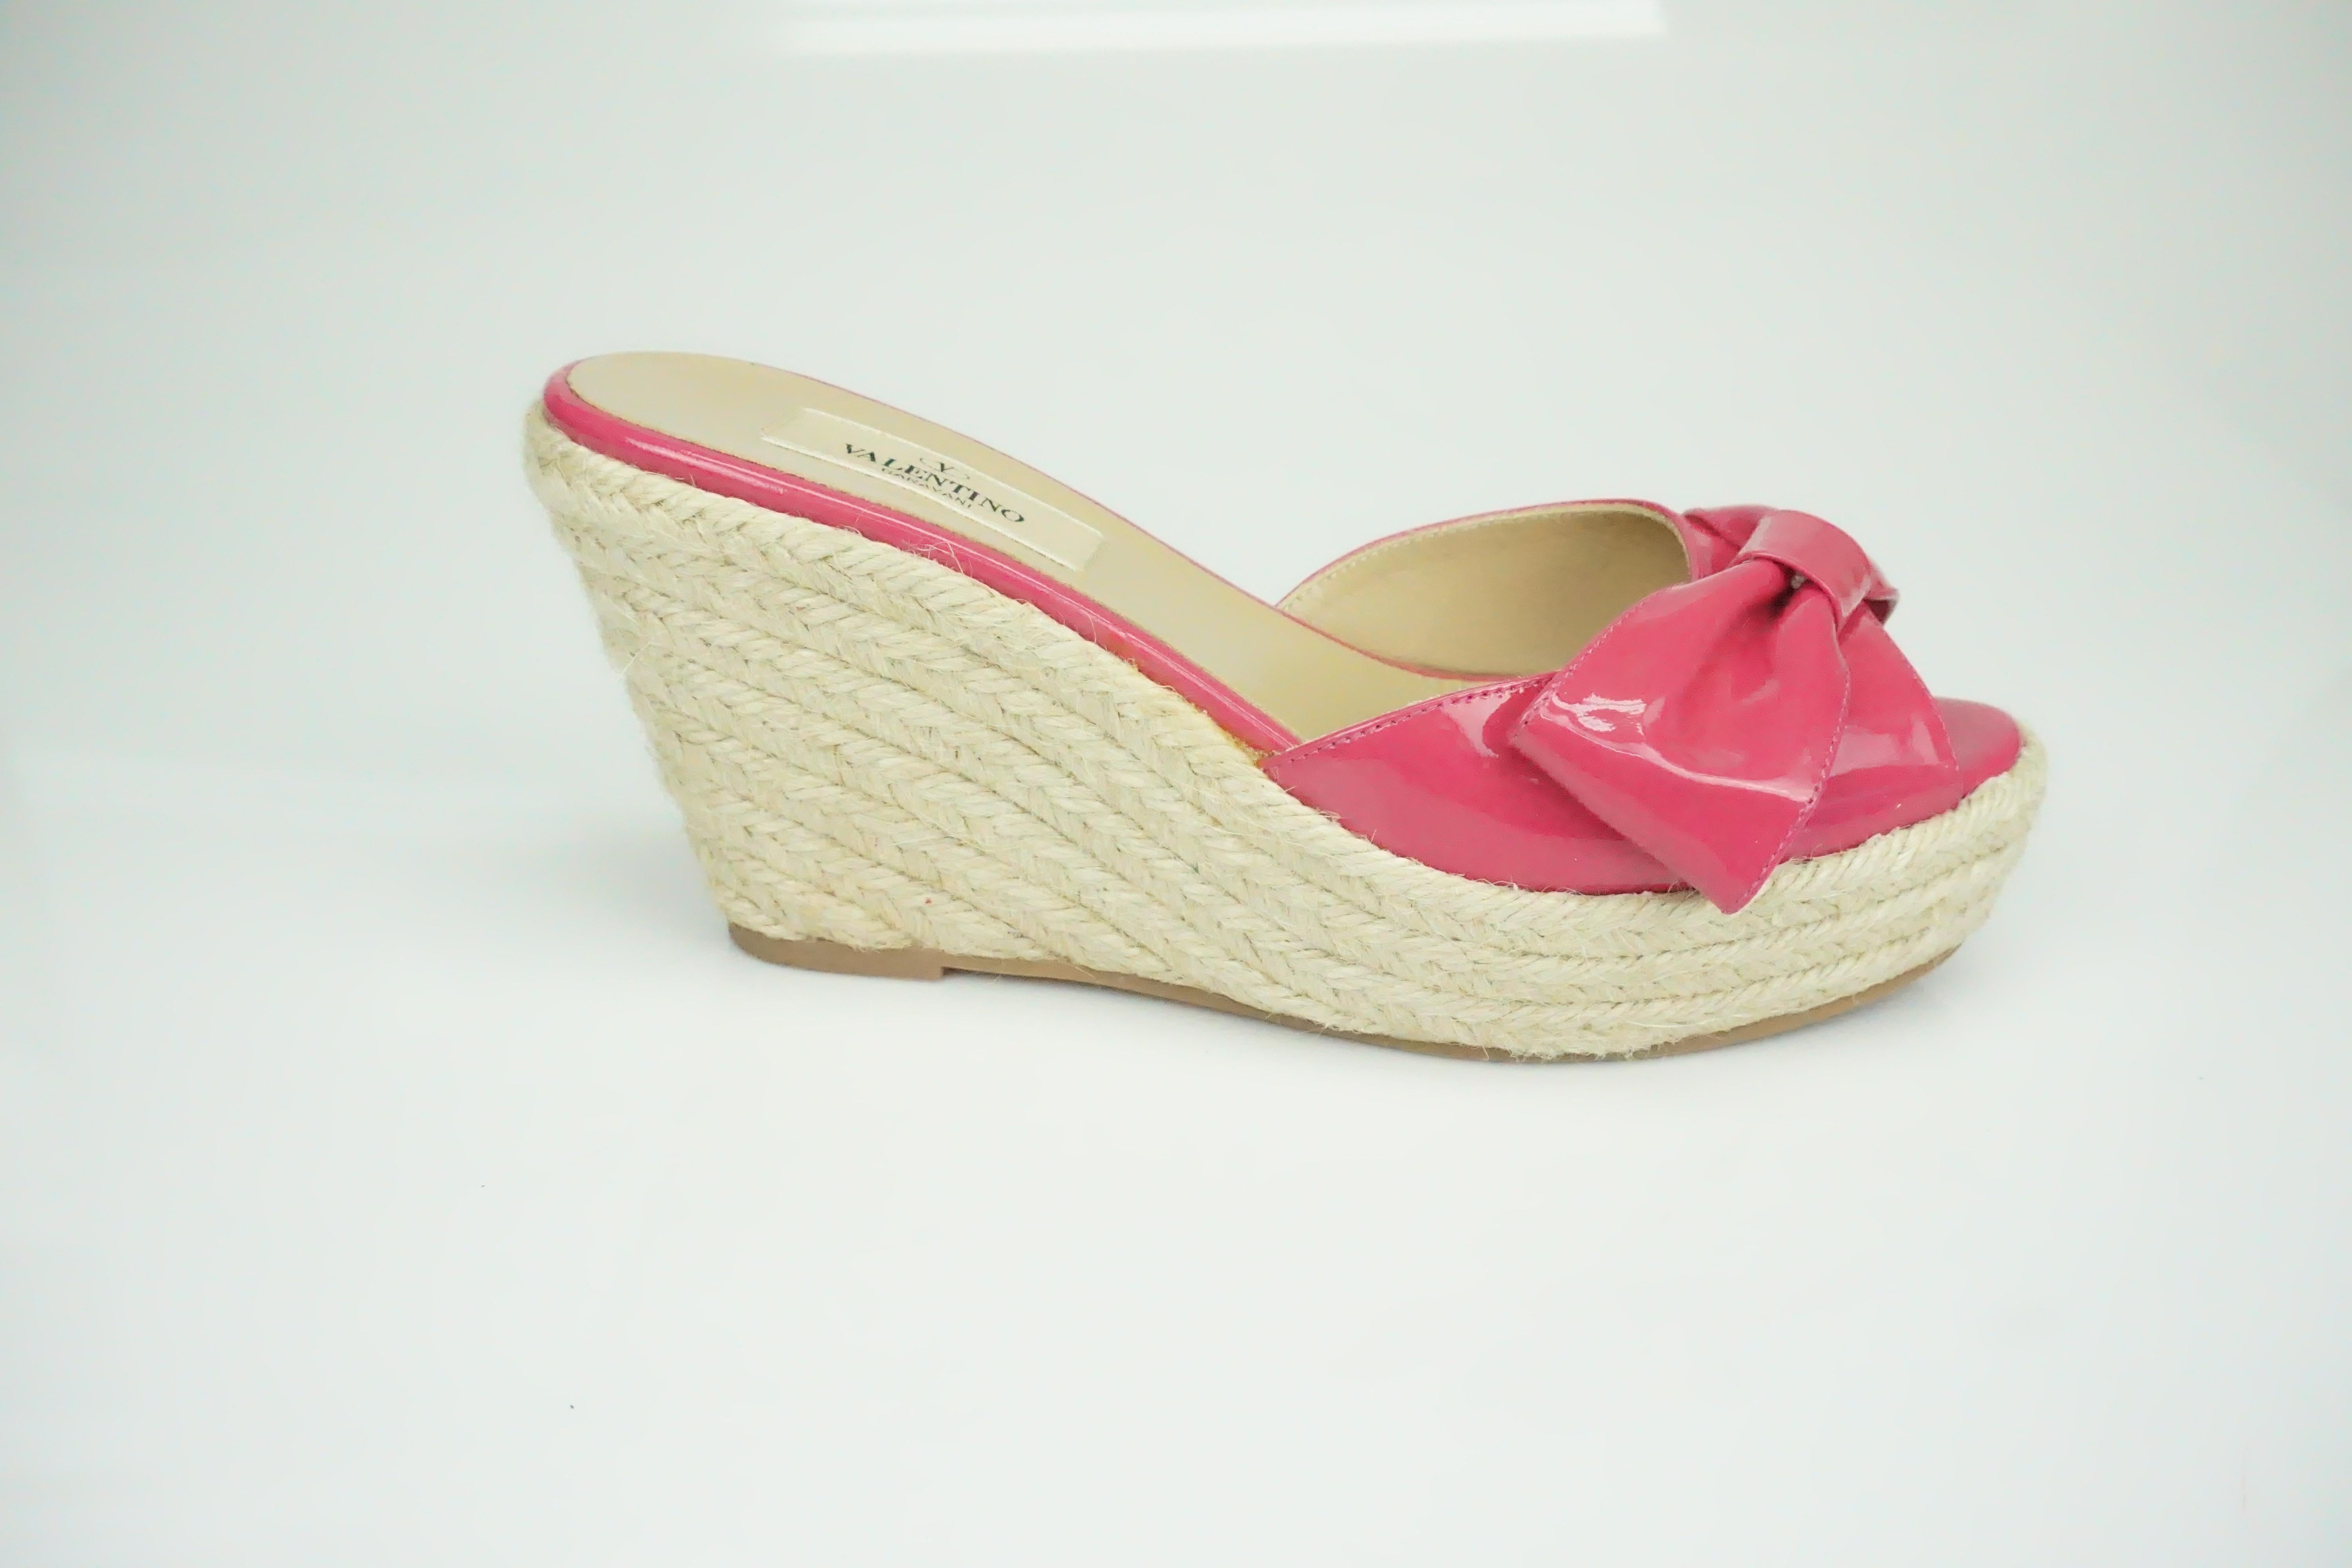 Valentino Hot Pink Patent Espadrille Wedges w/ Bow Detail - 36  These beautiful wedges are in good condition. There is very little wear to them besides the bottom of the shoe. There is no scuffing and no stains. The shoe has a peep toe and has a